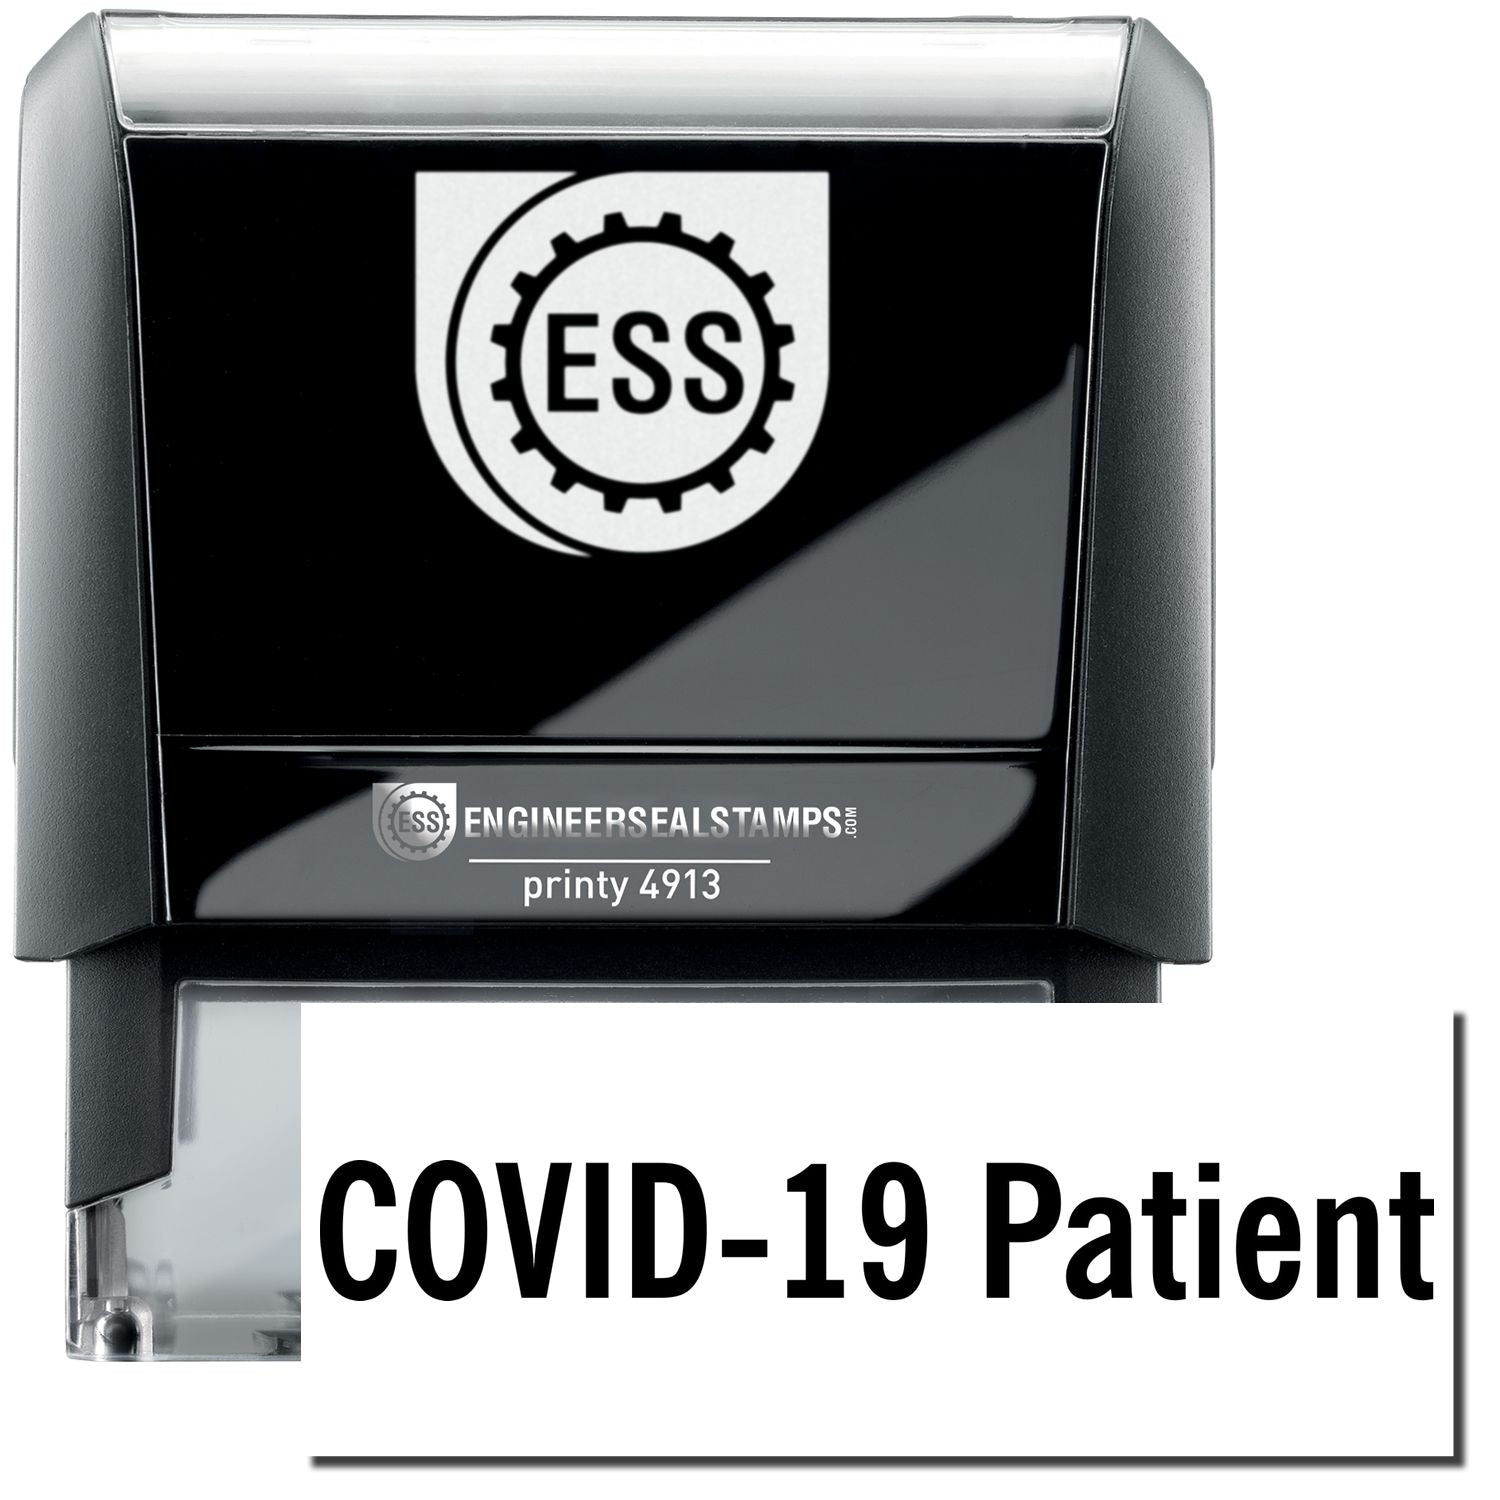 A self-inking stamp with a stamped image showing how the text "COVID-19 Patient" in a large font is displayed by it after stamping.